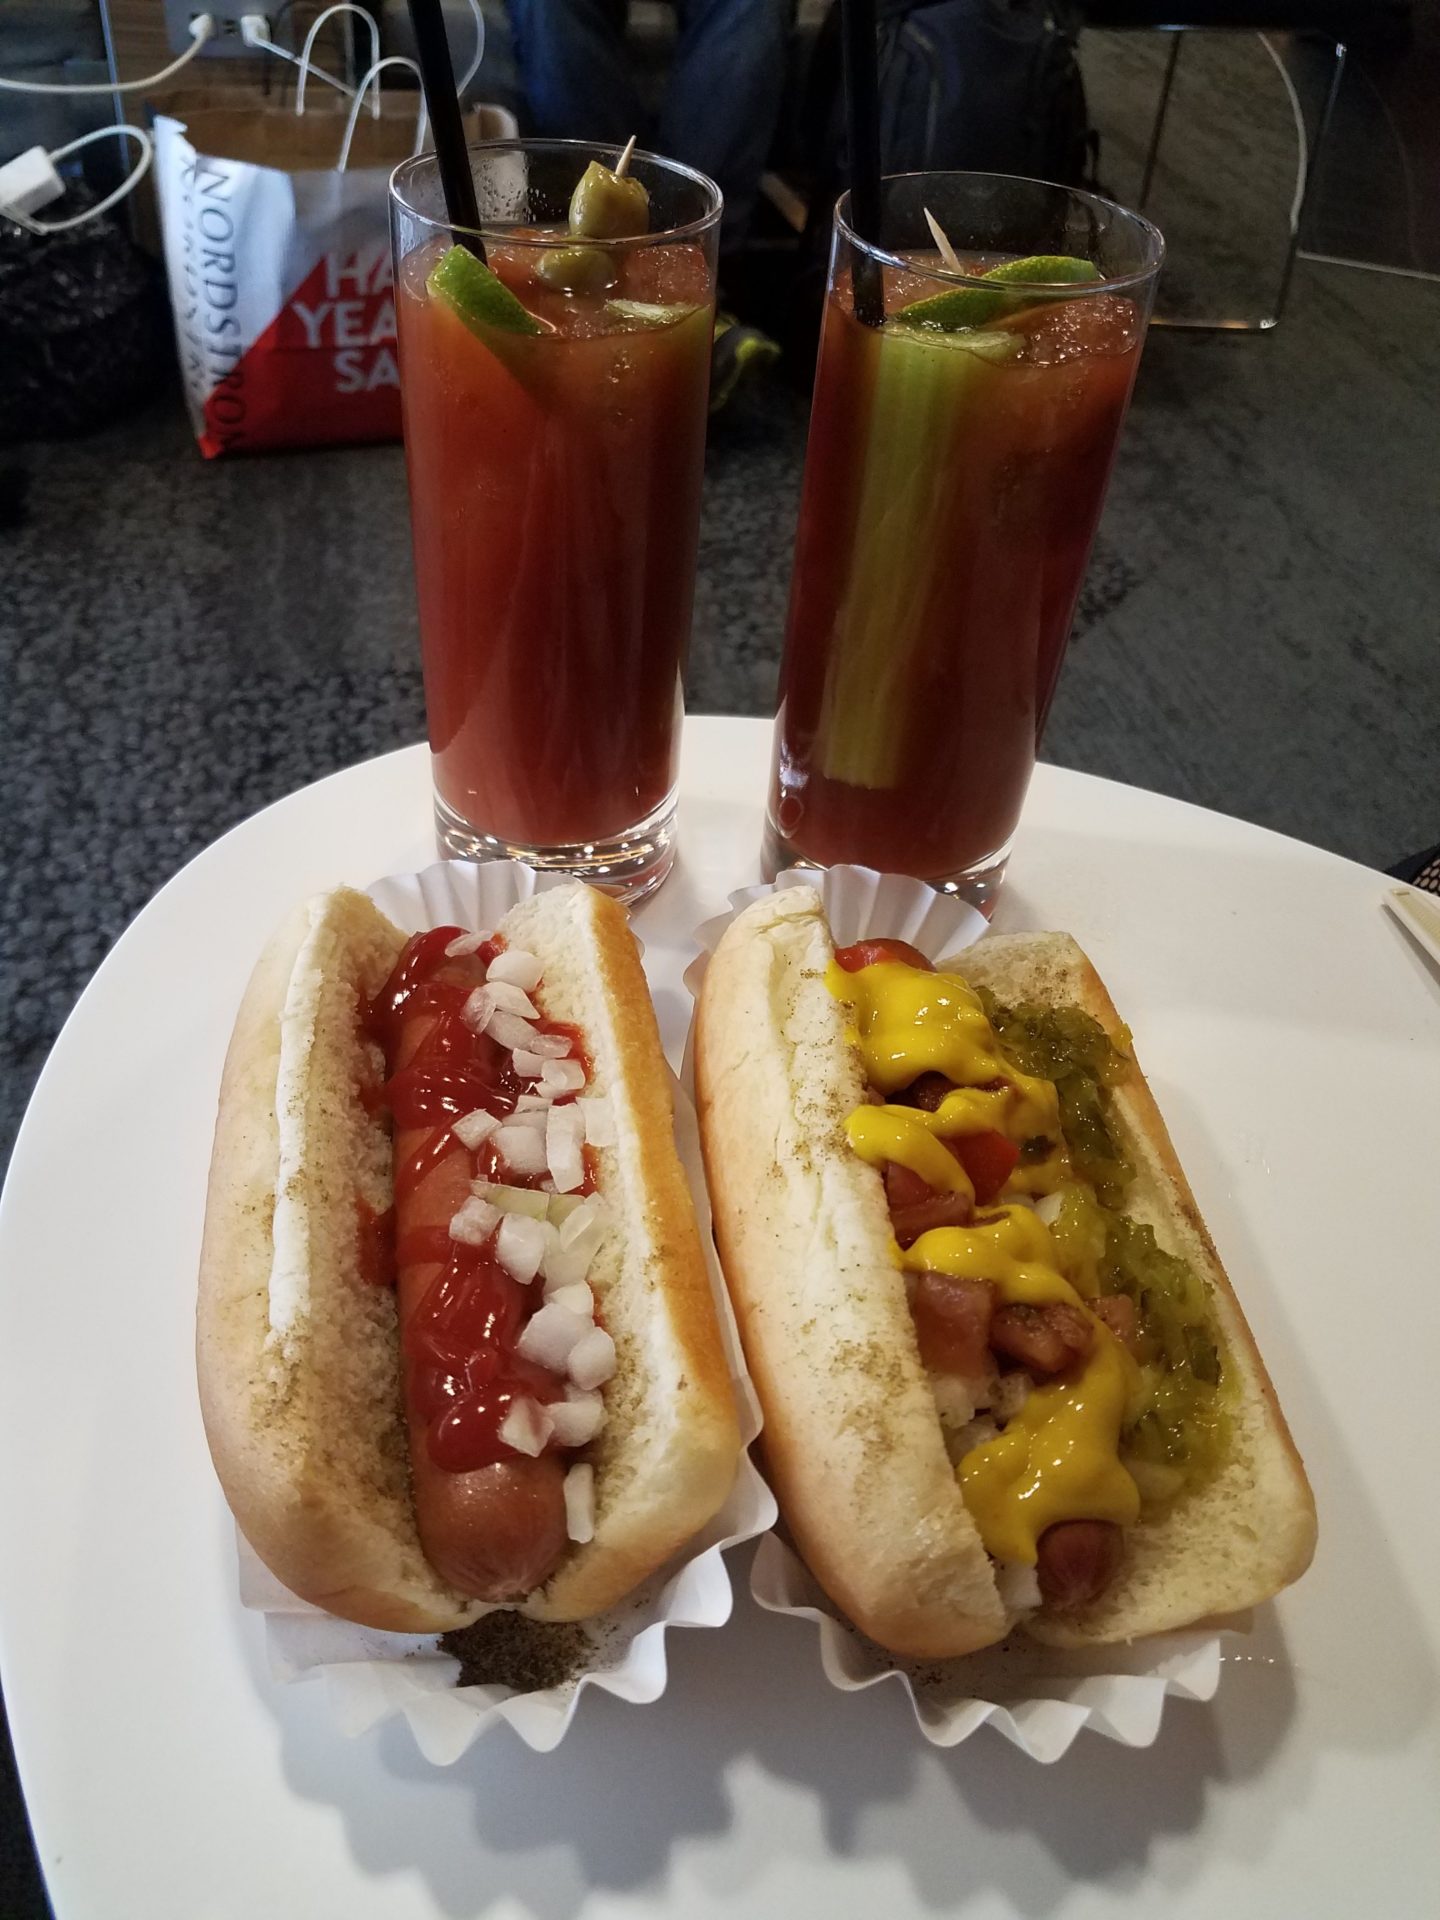 a plate of hot dogs and drinks